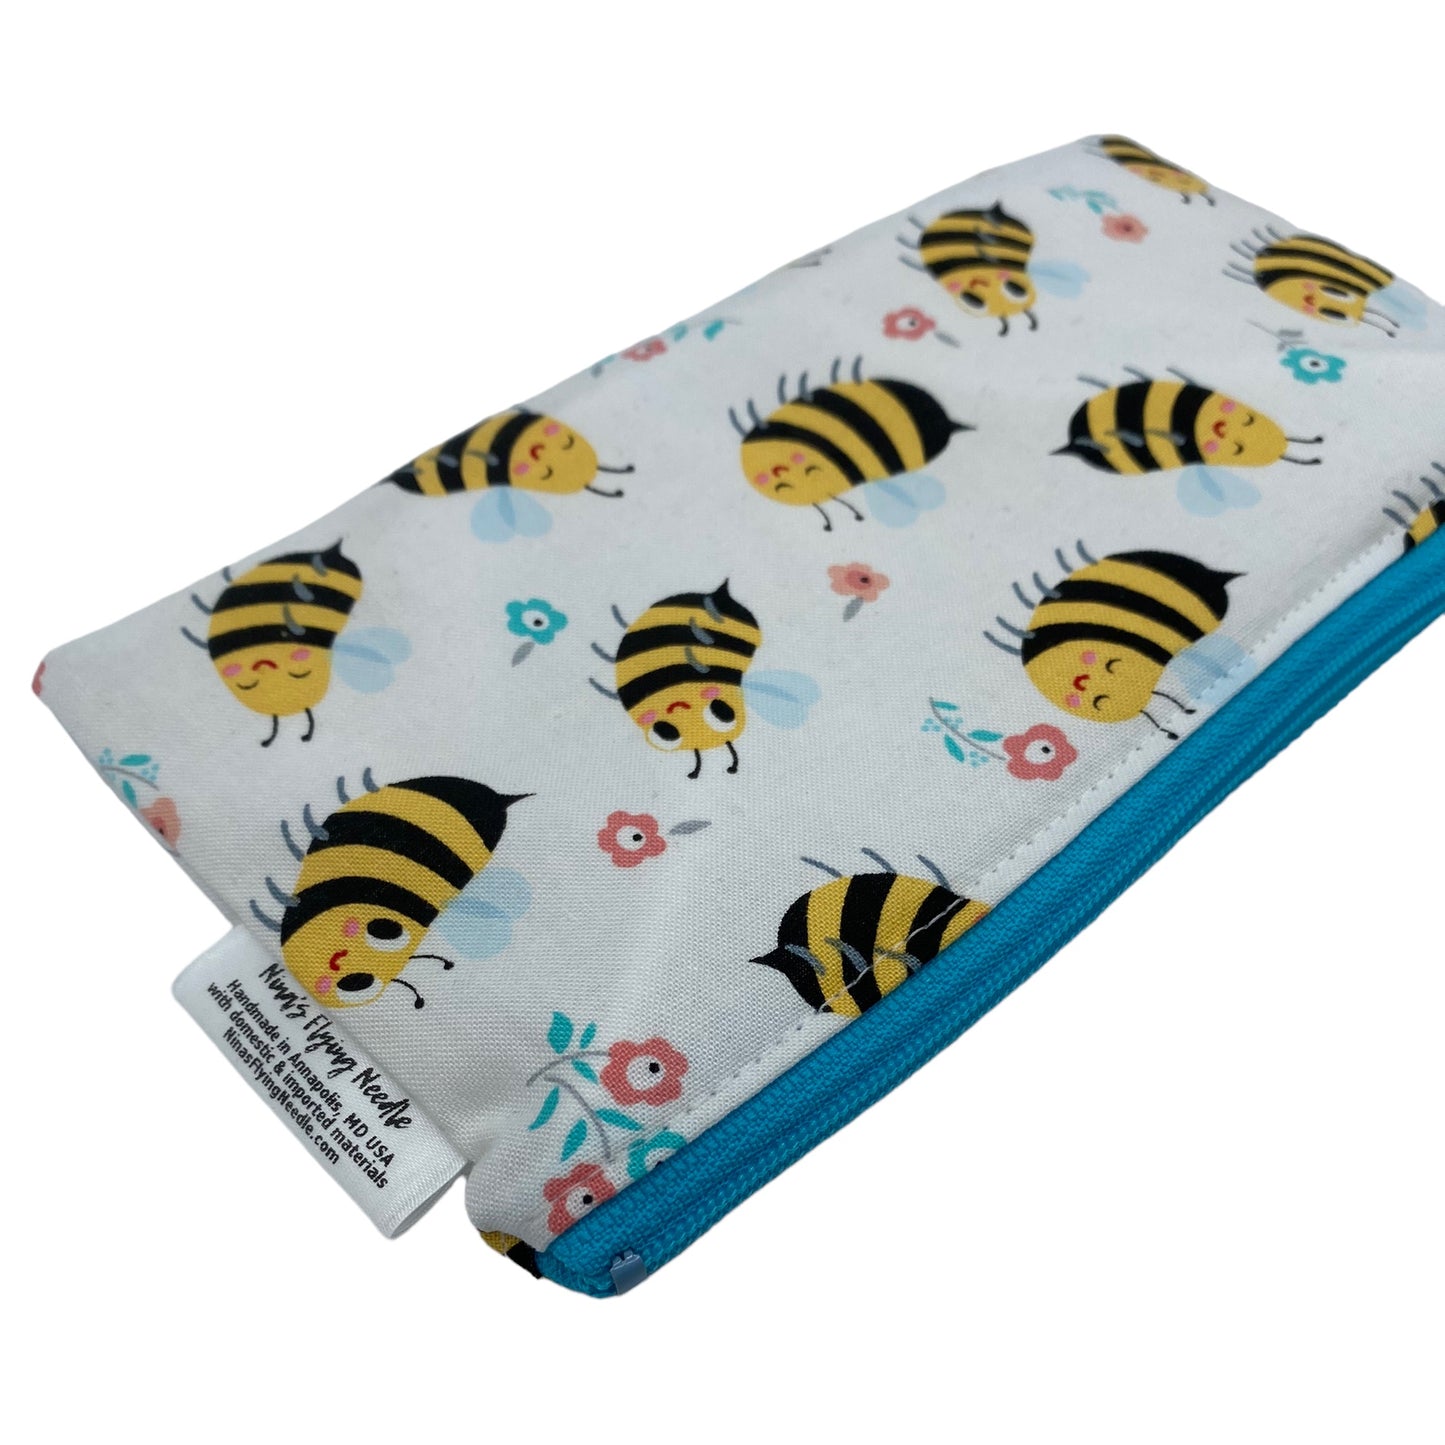 Knick Knack Sized Reusable Zippered Bag Bees